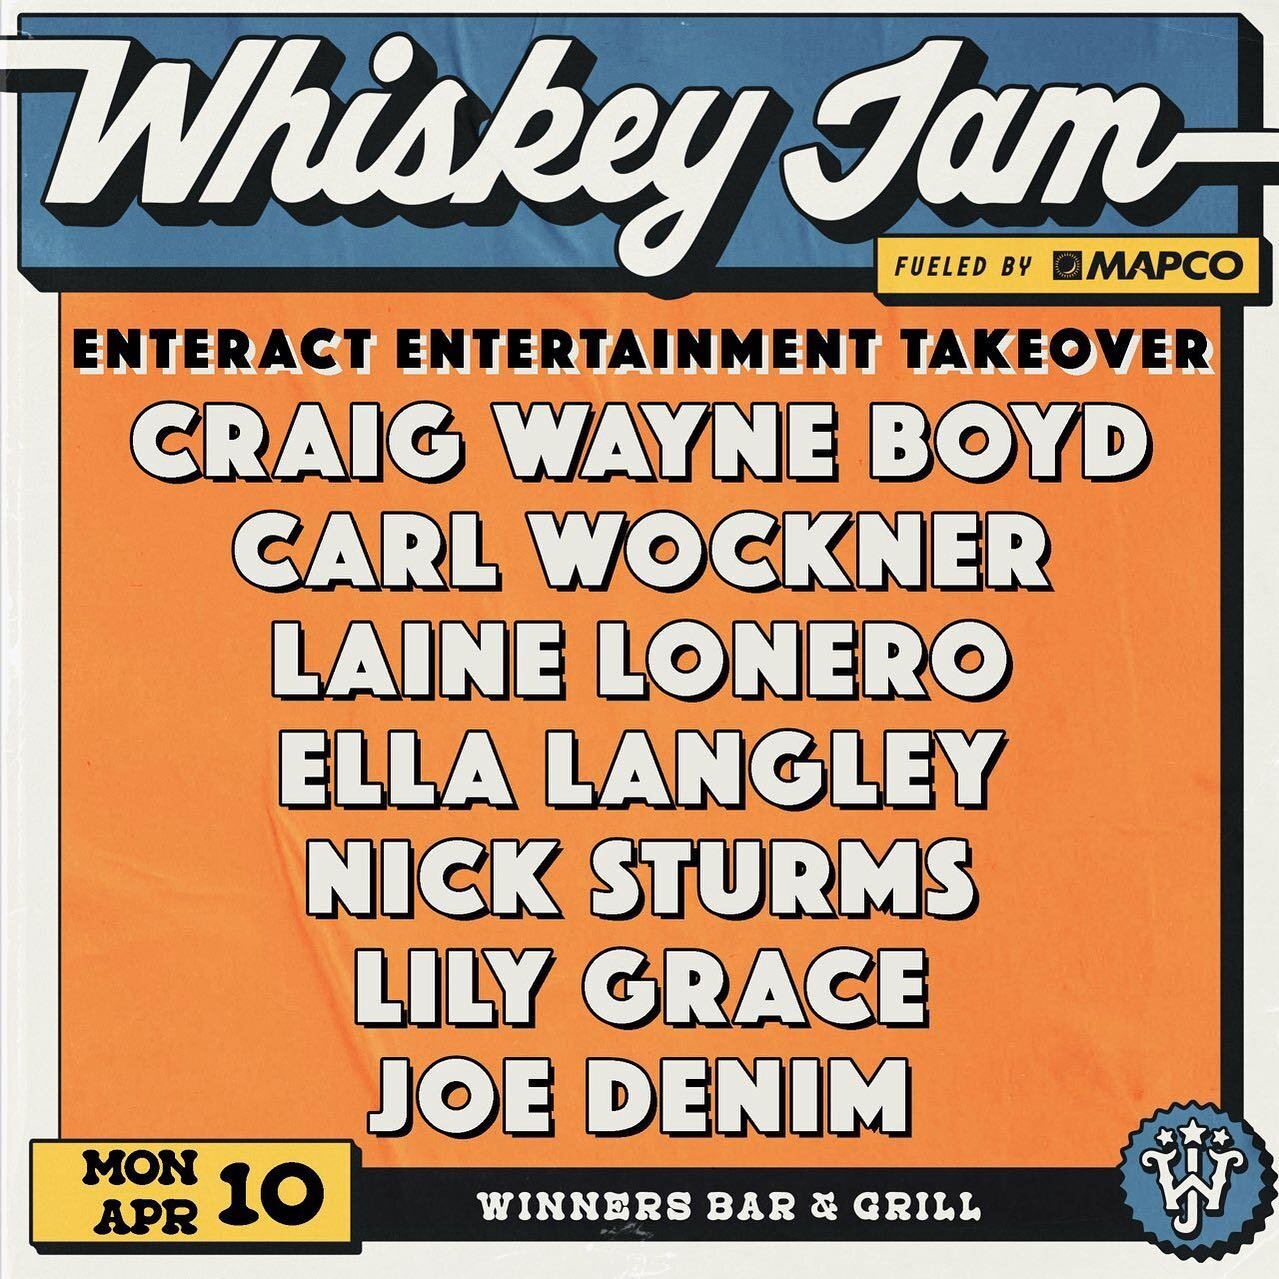 Looking forward to renderin a few new tunes on this one!! @whiskeyjam